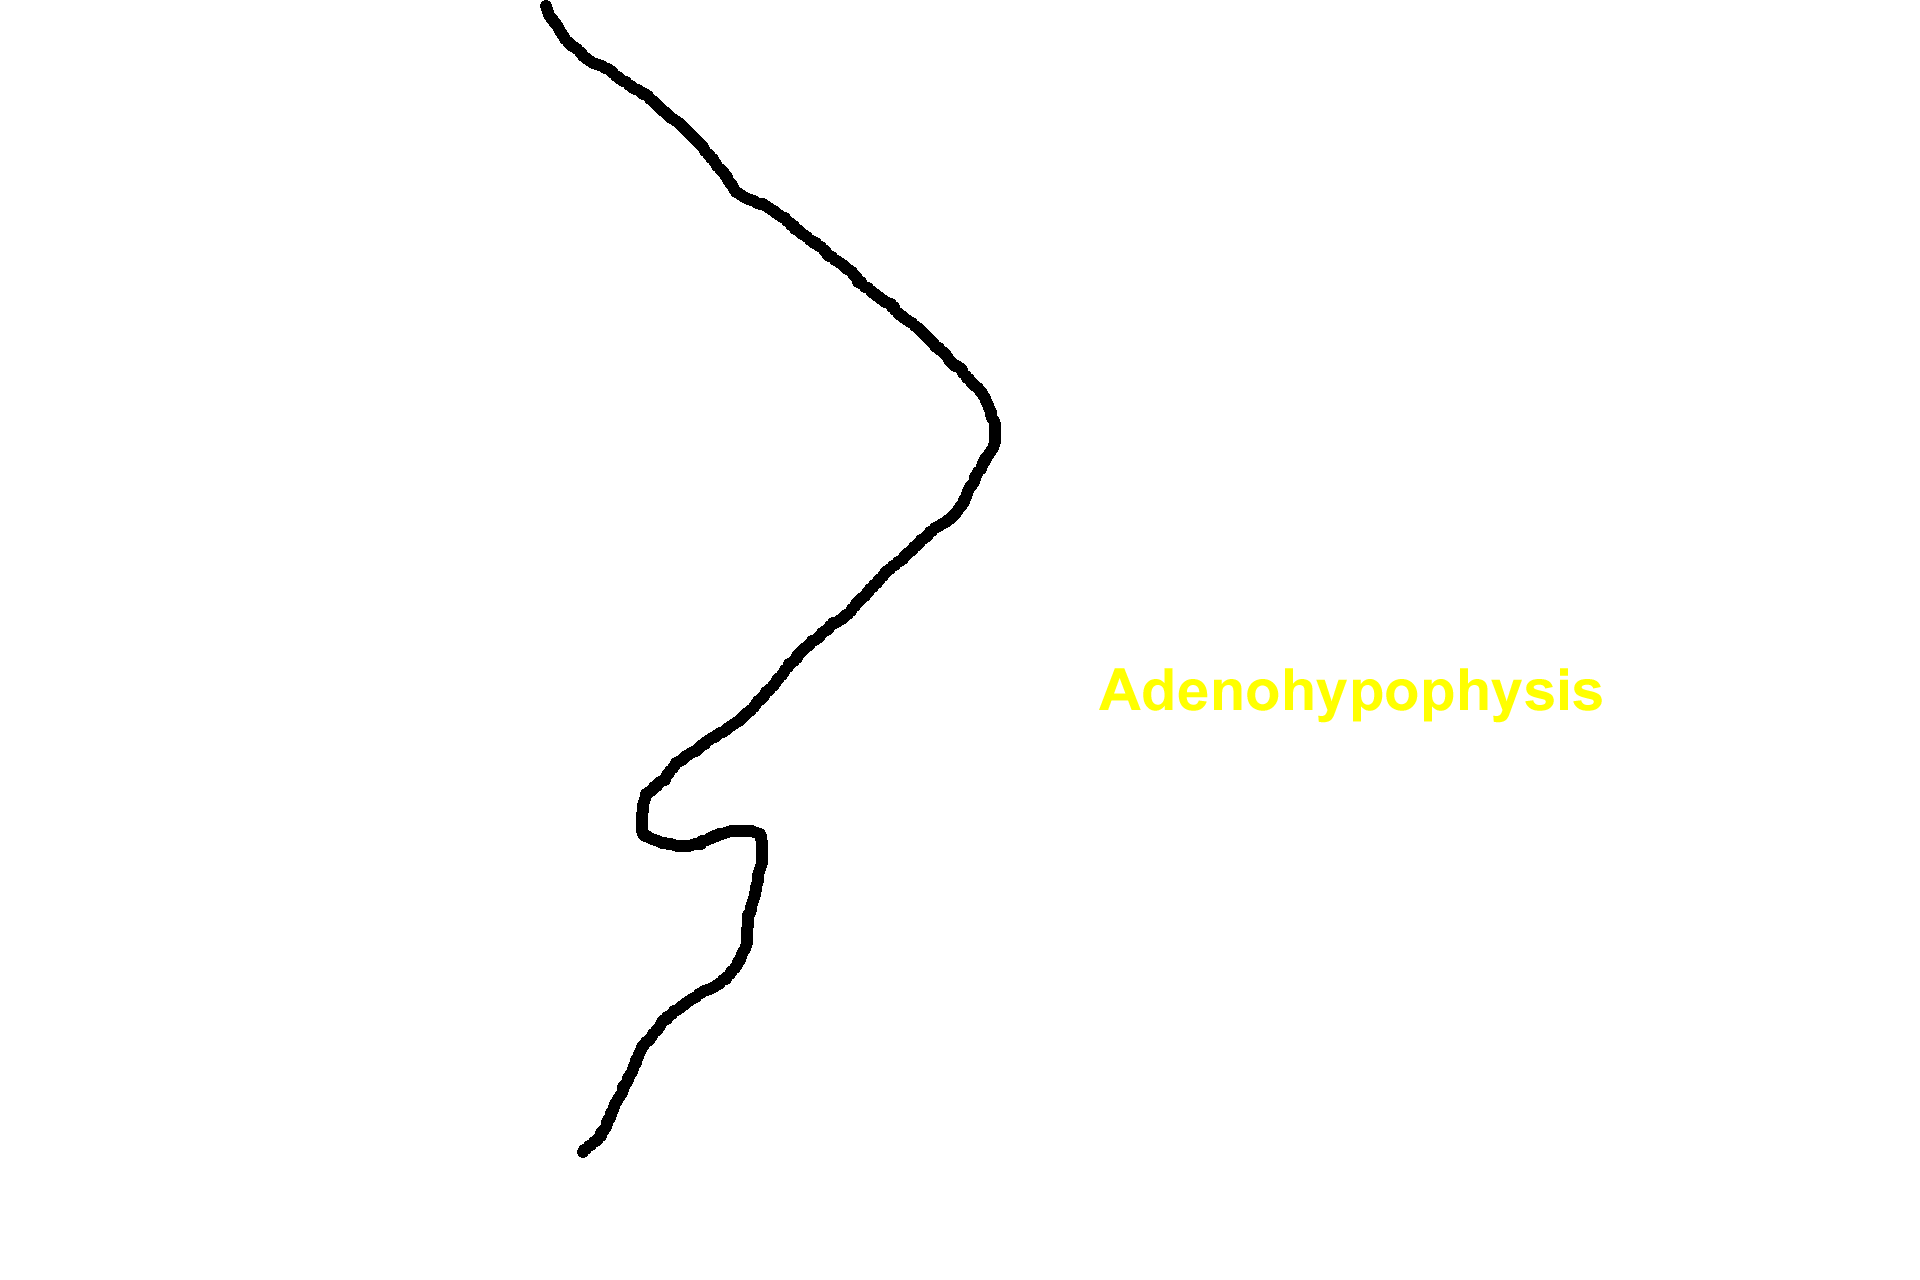 Adenohypophysis > <p>The adenohypophysis is derived from the epithelium that lines the roof of the developing oral cavity and consists of the pars distalis, pars tuberalis and pars intermedia.</p>
